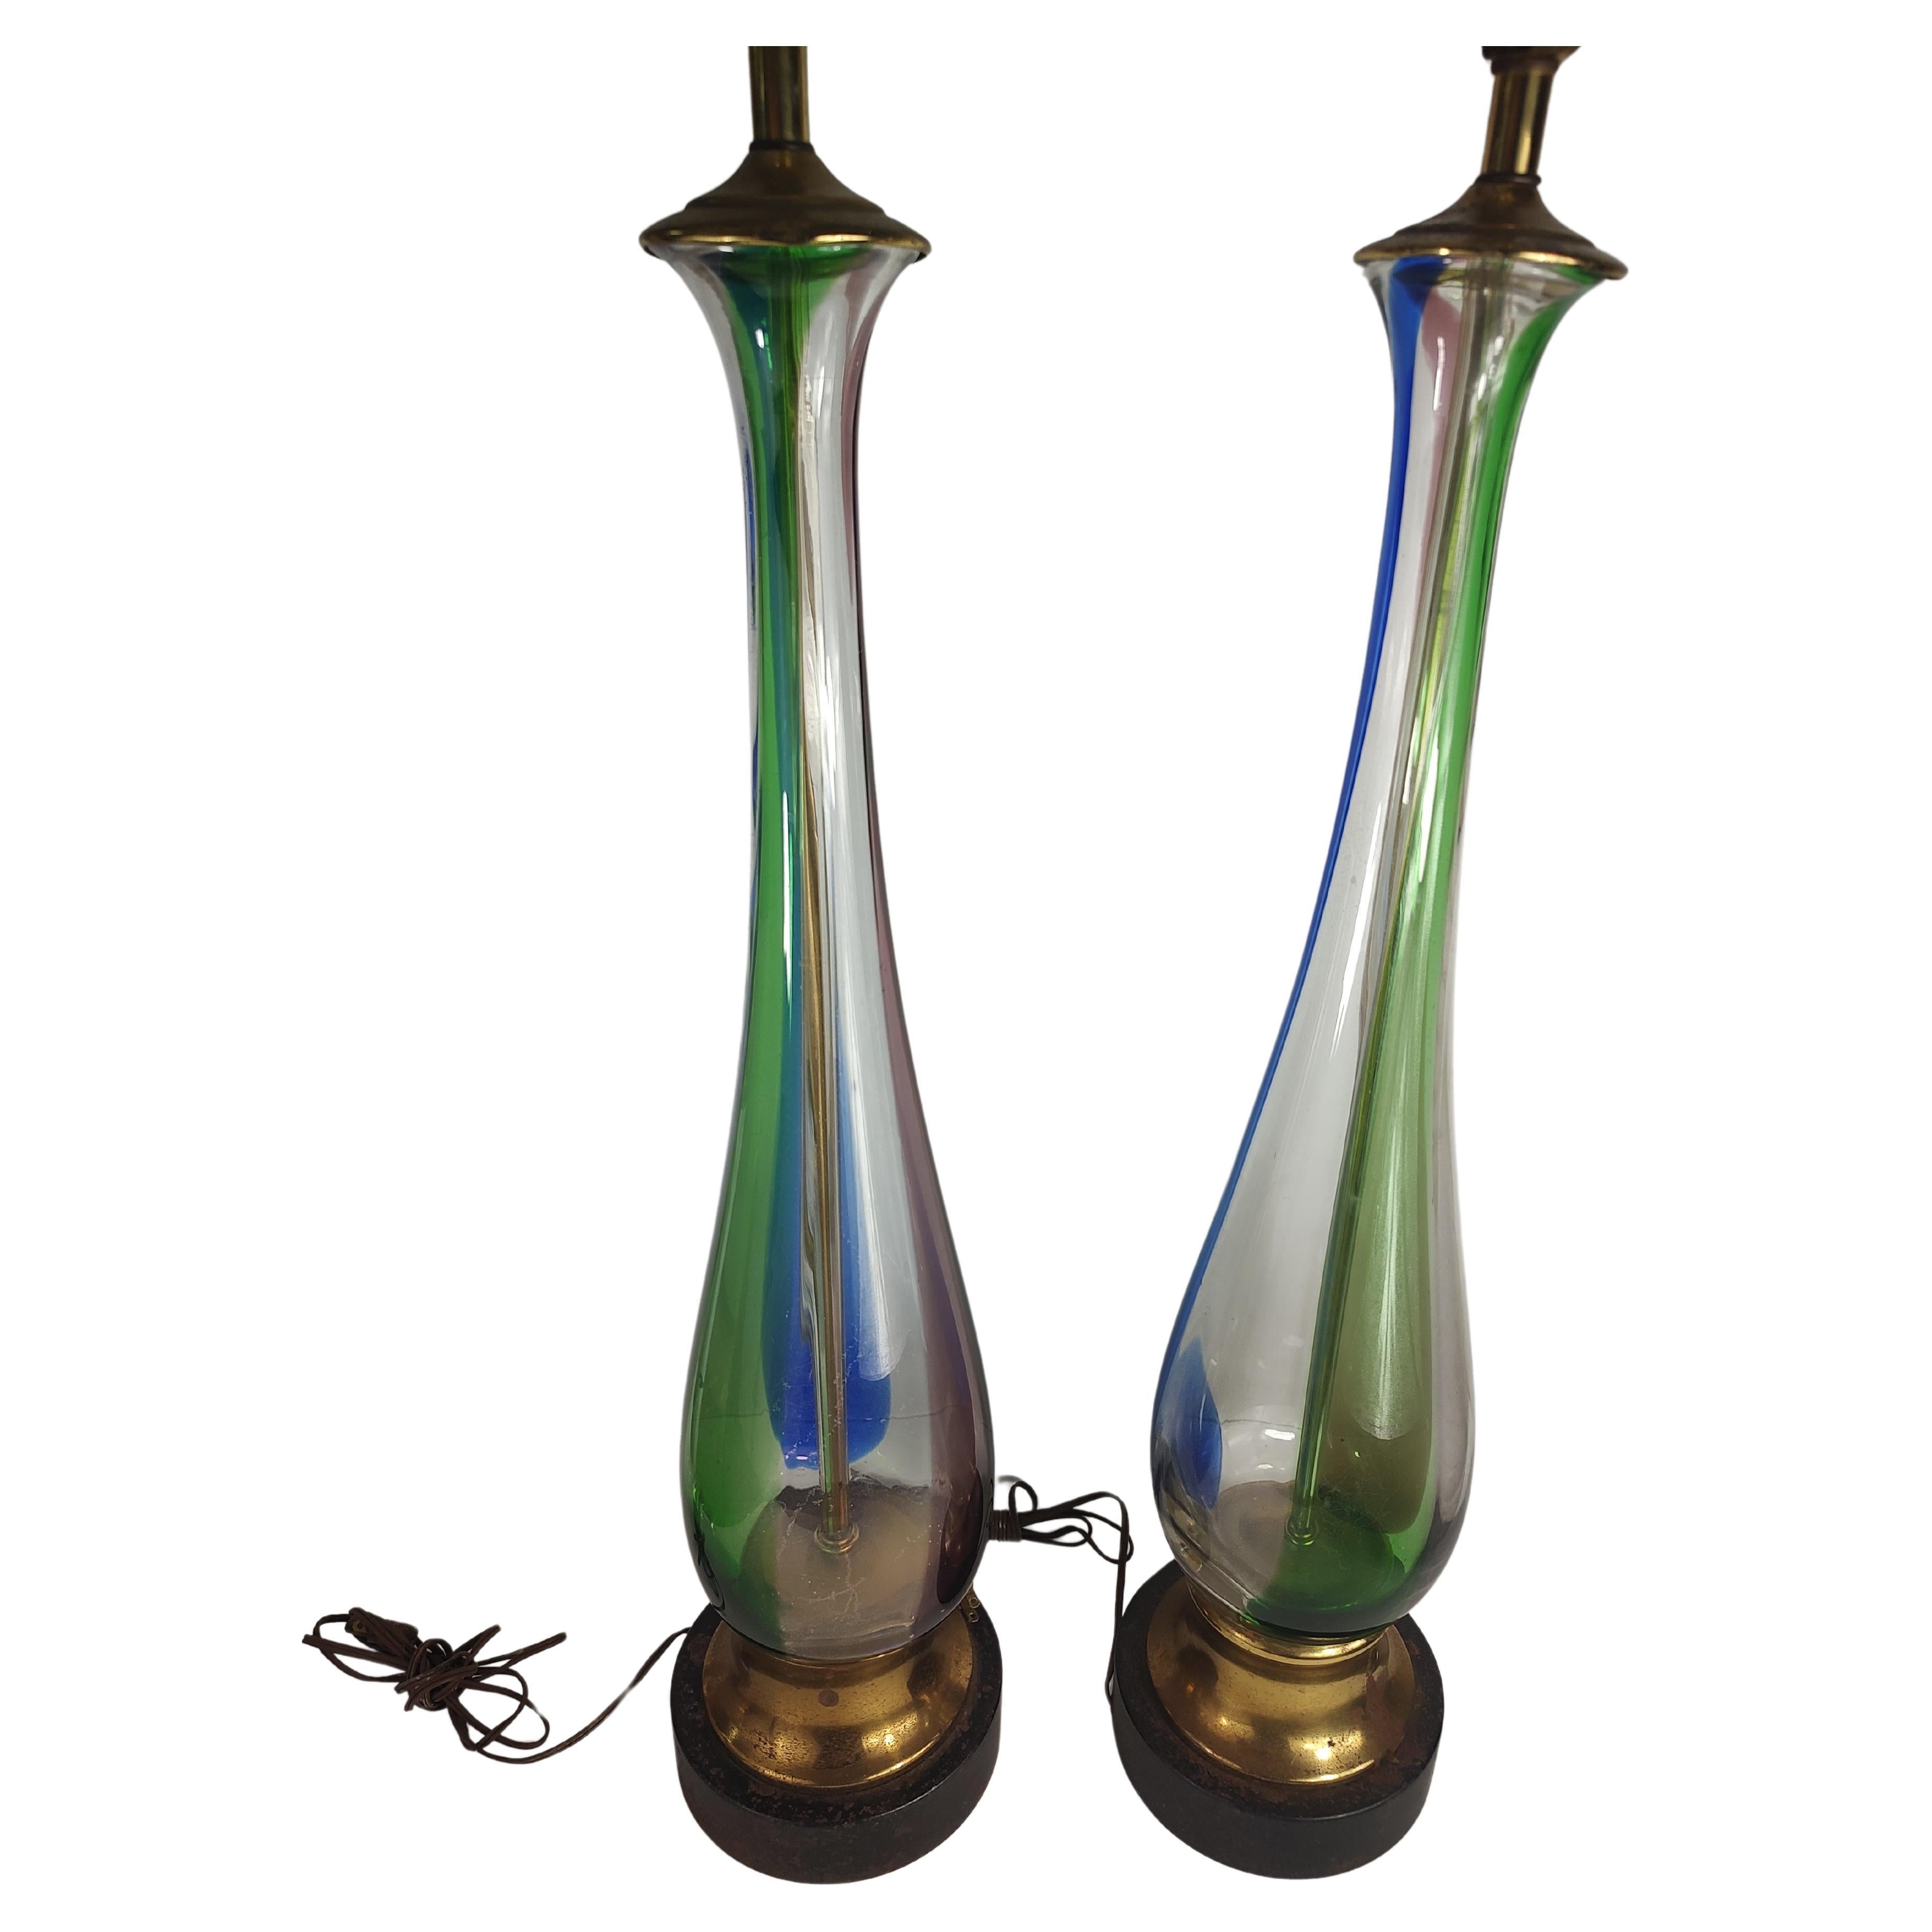 Fantastic pair of Barovier & Toso tall Murano table lamps in green red & blue swirl pattern. 34.5 to the top of the socket. Tapered and thick, bottom starts at 7 in. In excellent vintage condition with some tarnish and age related wear. Sold as a